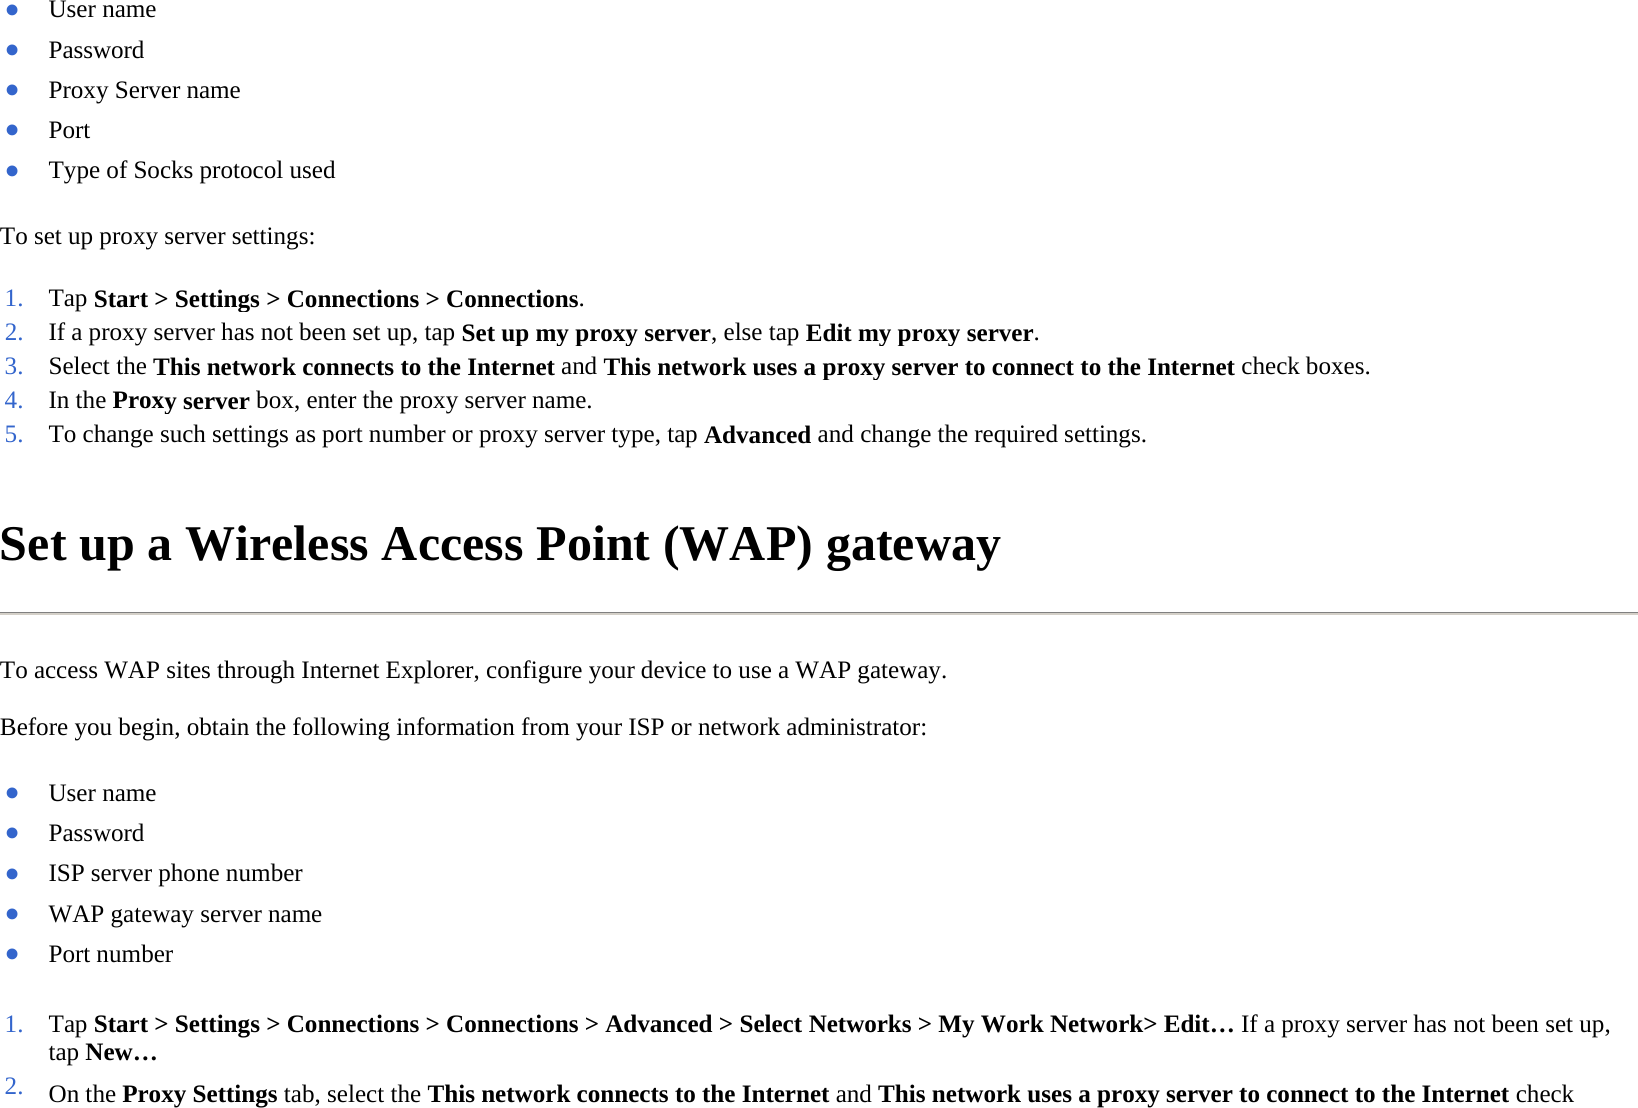 To set up proxy server settings:  Set up a Wireless Access Point (WAP) gateway  To access WAP sites through Internet Explorer, configure your device to use a WAP gateway.  Before you begin, obtain the following information from your ISP or network administrator:  ●User name ●Password ●Proxy Server name●Port ●Type of Socks protocol used1. Tap Start &gt; Settings &gt; Connections &gt; Connections.2. If a proxy server has not been set up, tap Set up my proxy server, else tapEdit my proxy server.3. Select the This network connects to the Internet and This network uses aproxy server to connect to the Internet check boxes.4. In the Proxy serverbox, enter the proxy server name.5. To change such settings as port number or proxy server type, tapAdvanced and change the required settings.●User name ●Password ●ISP server phone number●WAP gateway server name●Port number 1. Tap Start &gt; Settings &gt; Connections &gt; Connections &gt; Advanced &gt; Select Networks &gt; My Work Network&gt; Edit… If a proxy server has not been set up, tap New…2. On the Proxy Settingstab, select the This network connects to the Internet and This network uses a proxy server to connect to the Internet check 